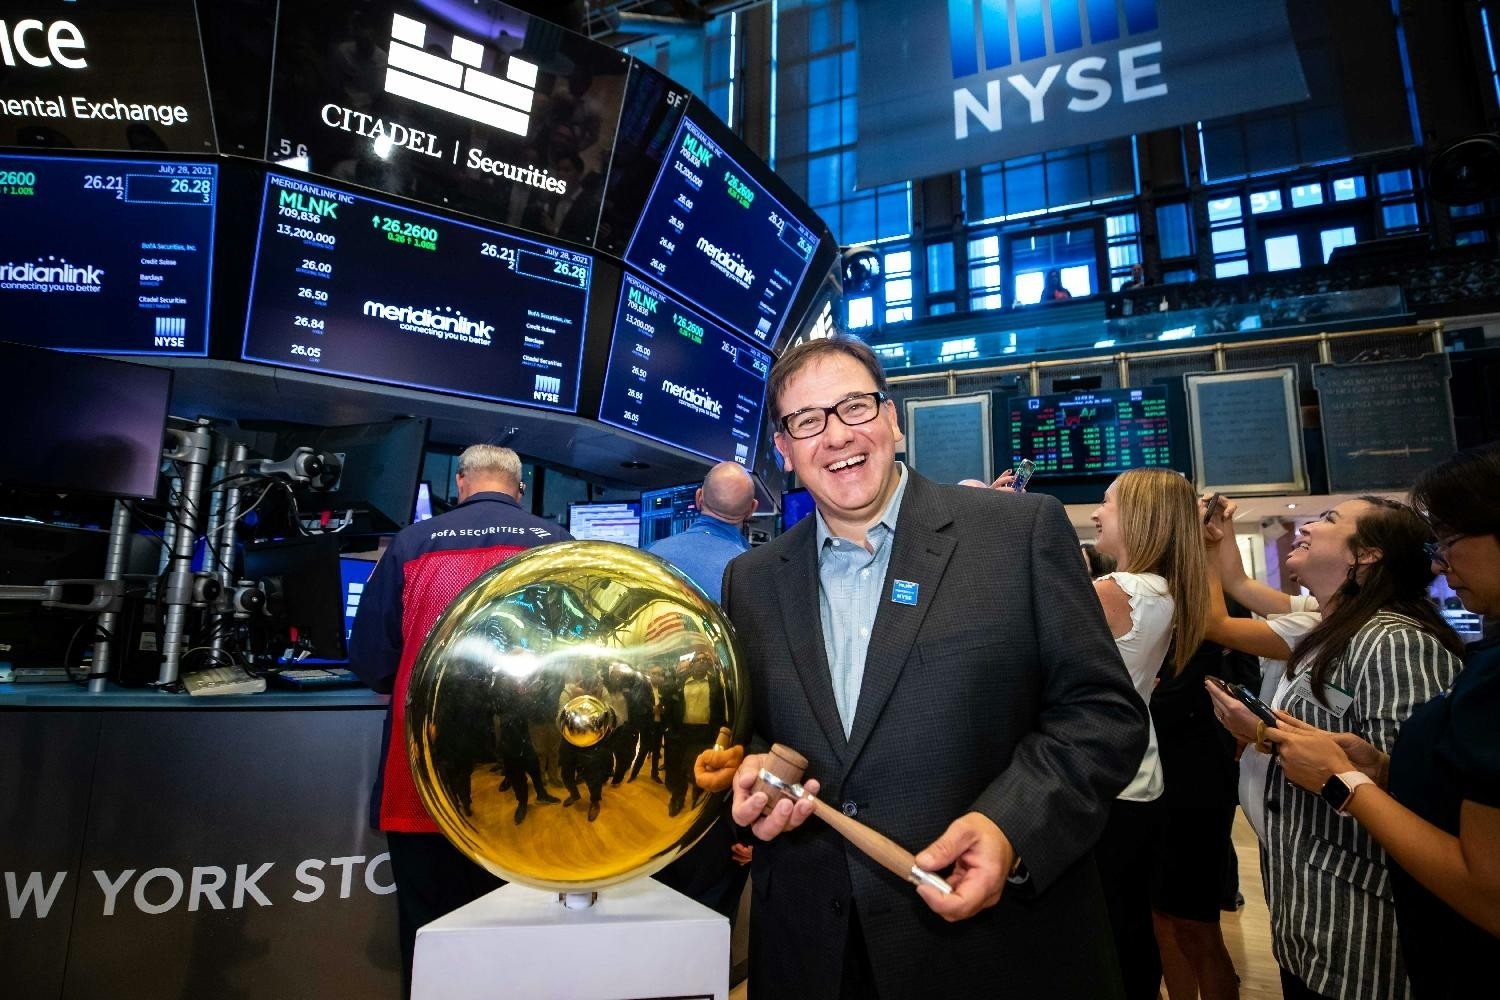 CEO Nicolaas Vlok rings the bell at the New York Stock Exchange to celebrate MeridianLink's IPO anniversary!